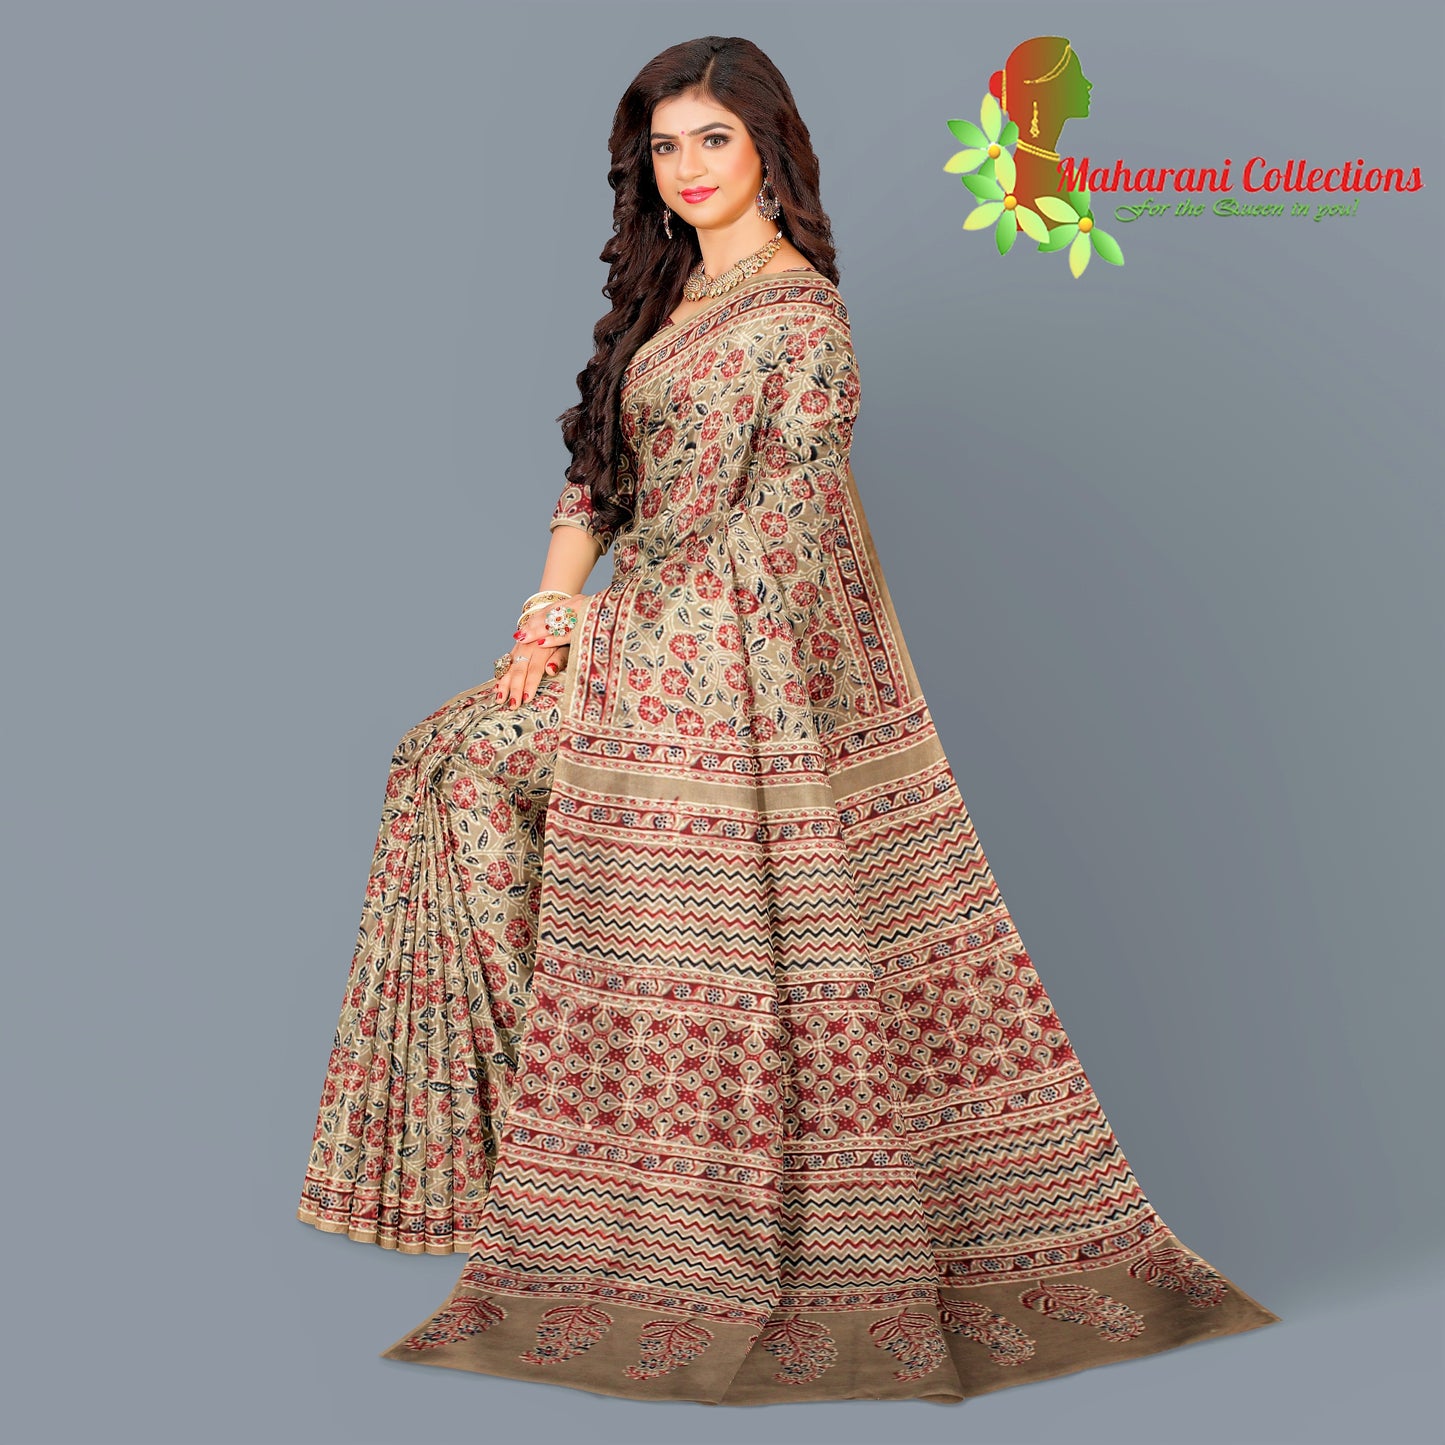 Rajasthani Ajrakh Mul-mul Silk Saree - Red and Brown  (with stitched blouse and petticoat)